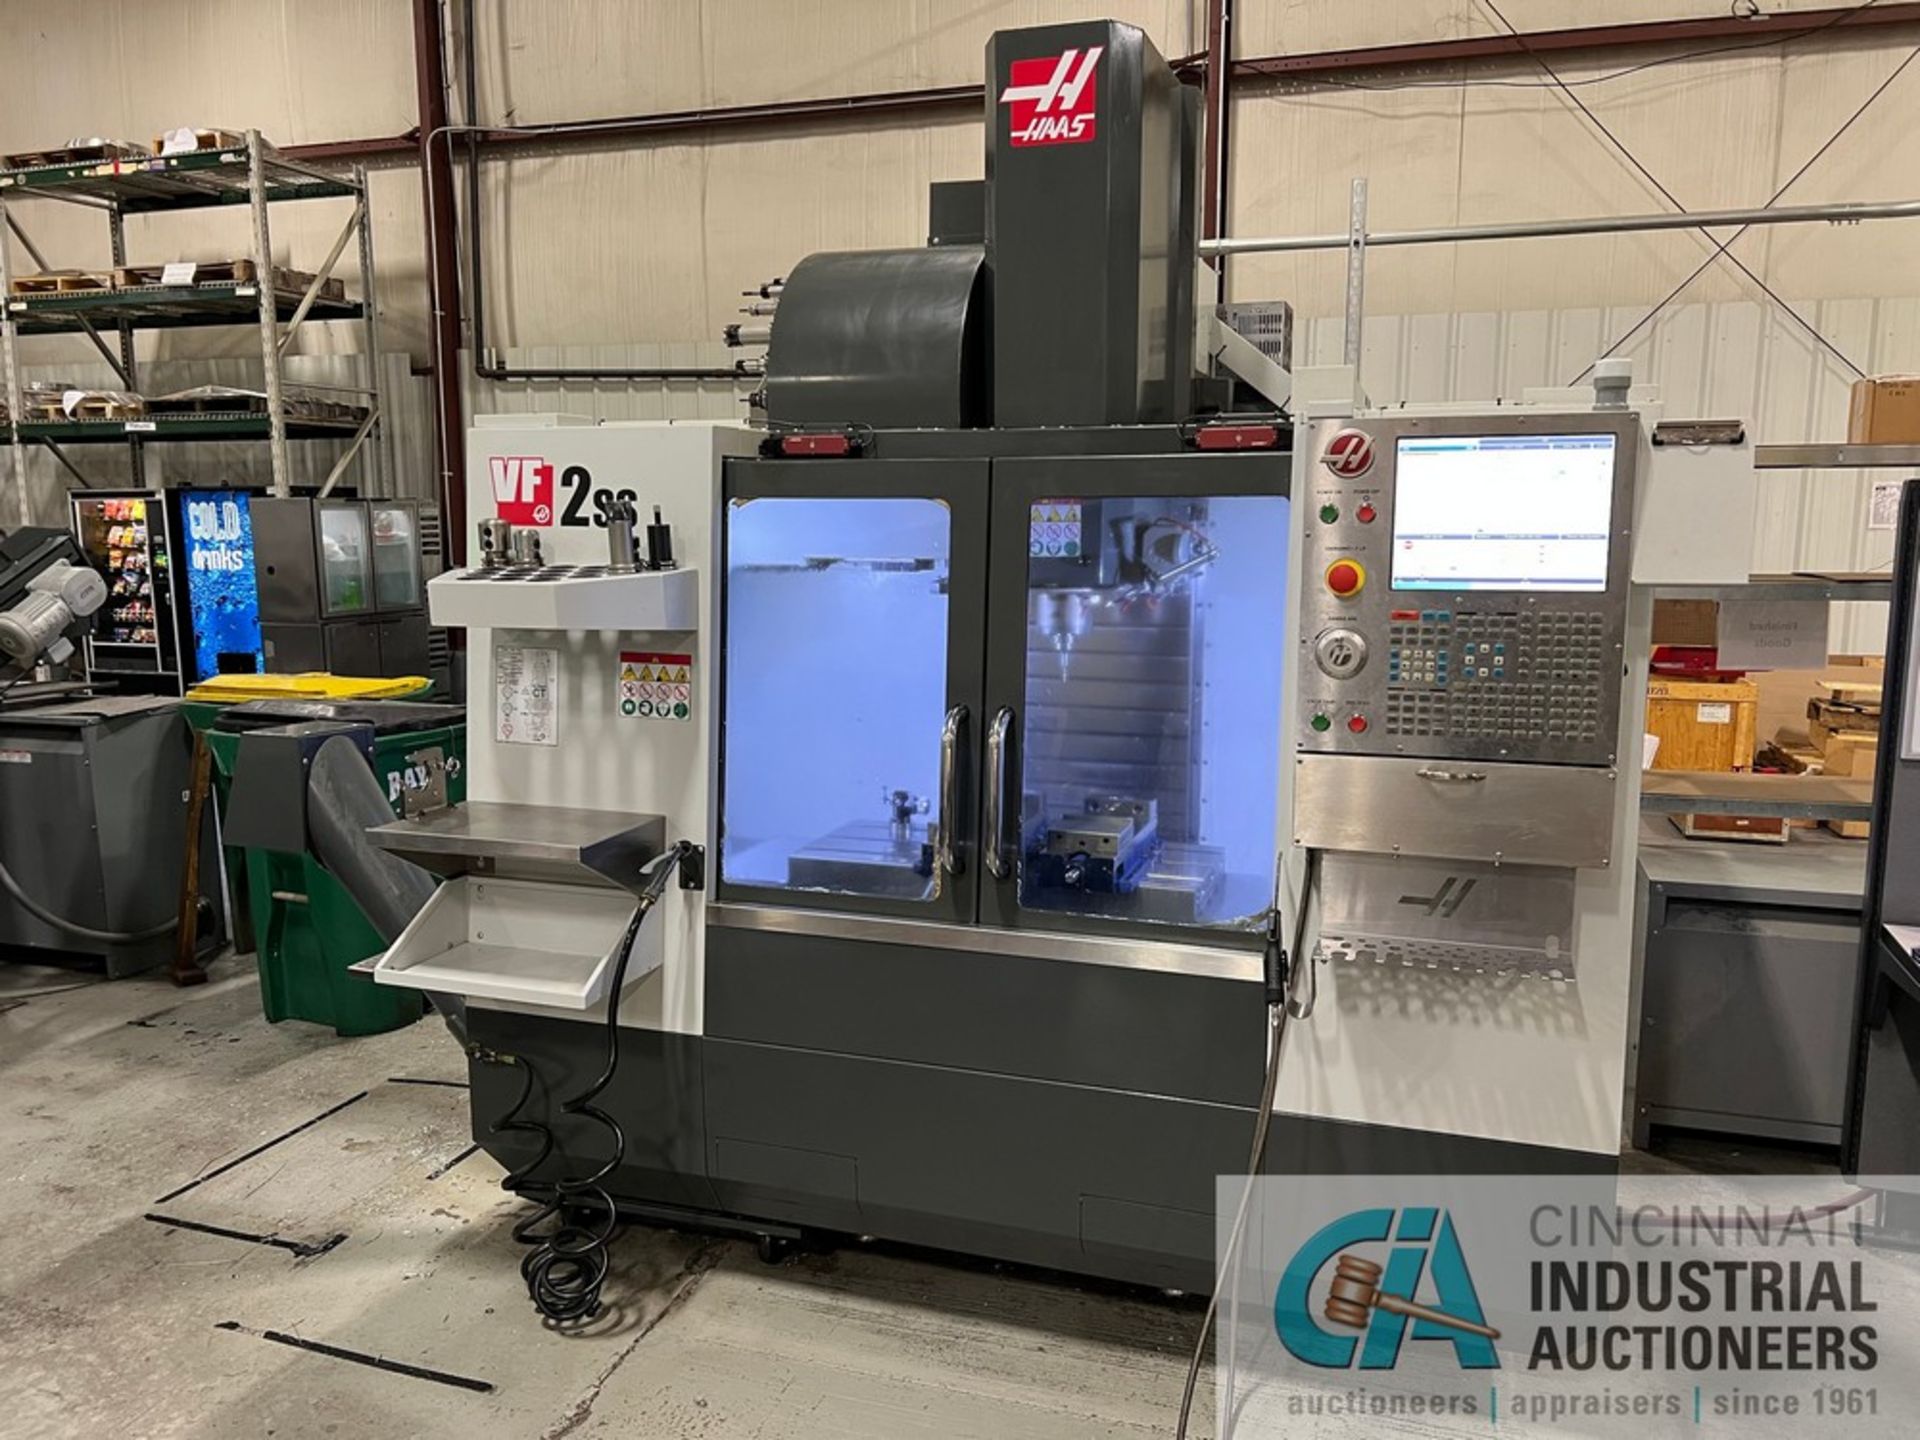 Haas Model VF-2SS CNC Vertical Machining Center (2016) 4,906 Cutting Hours Showing